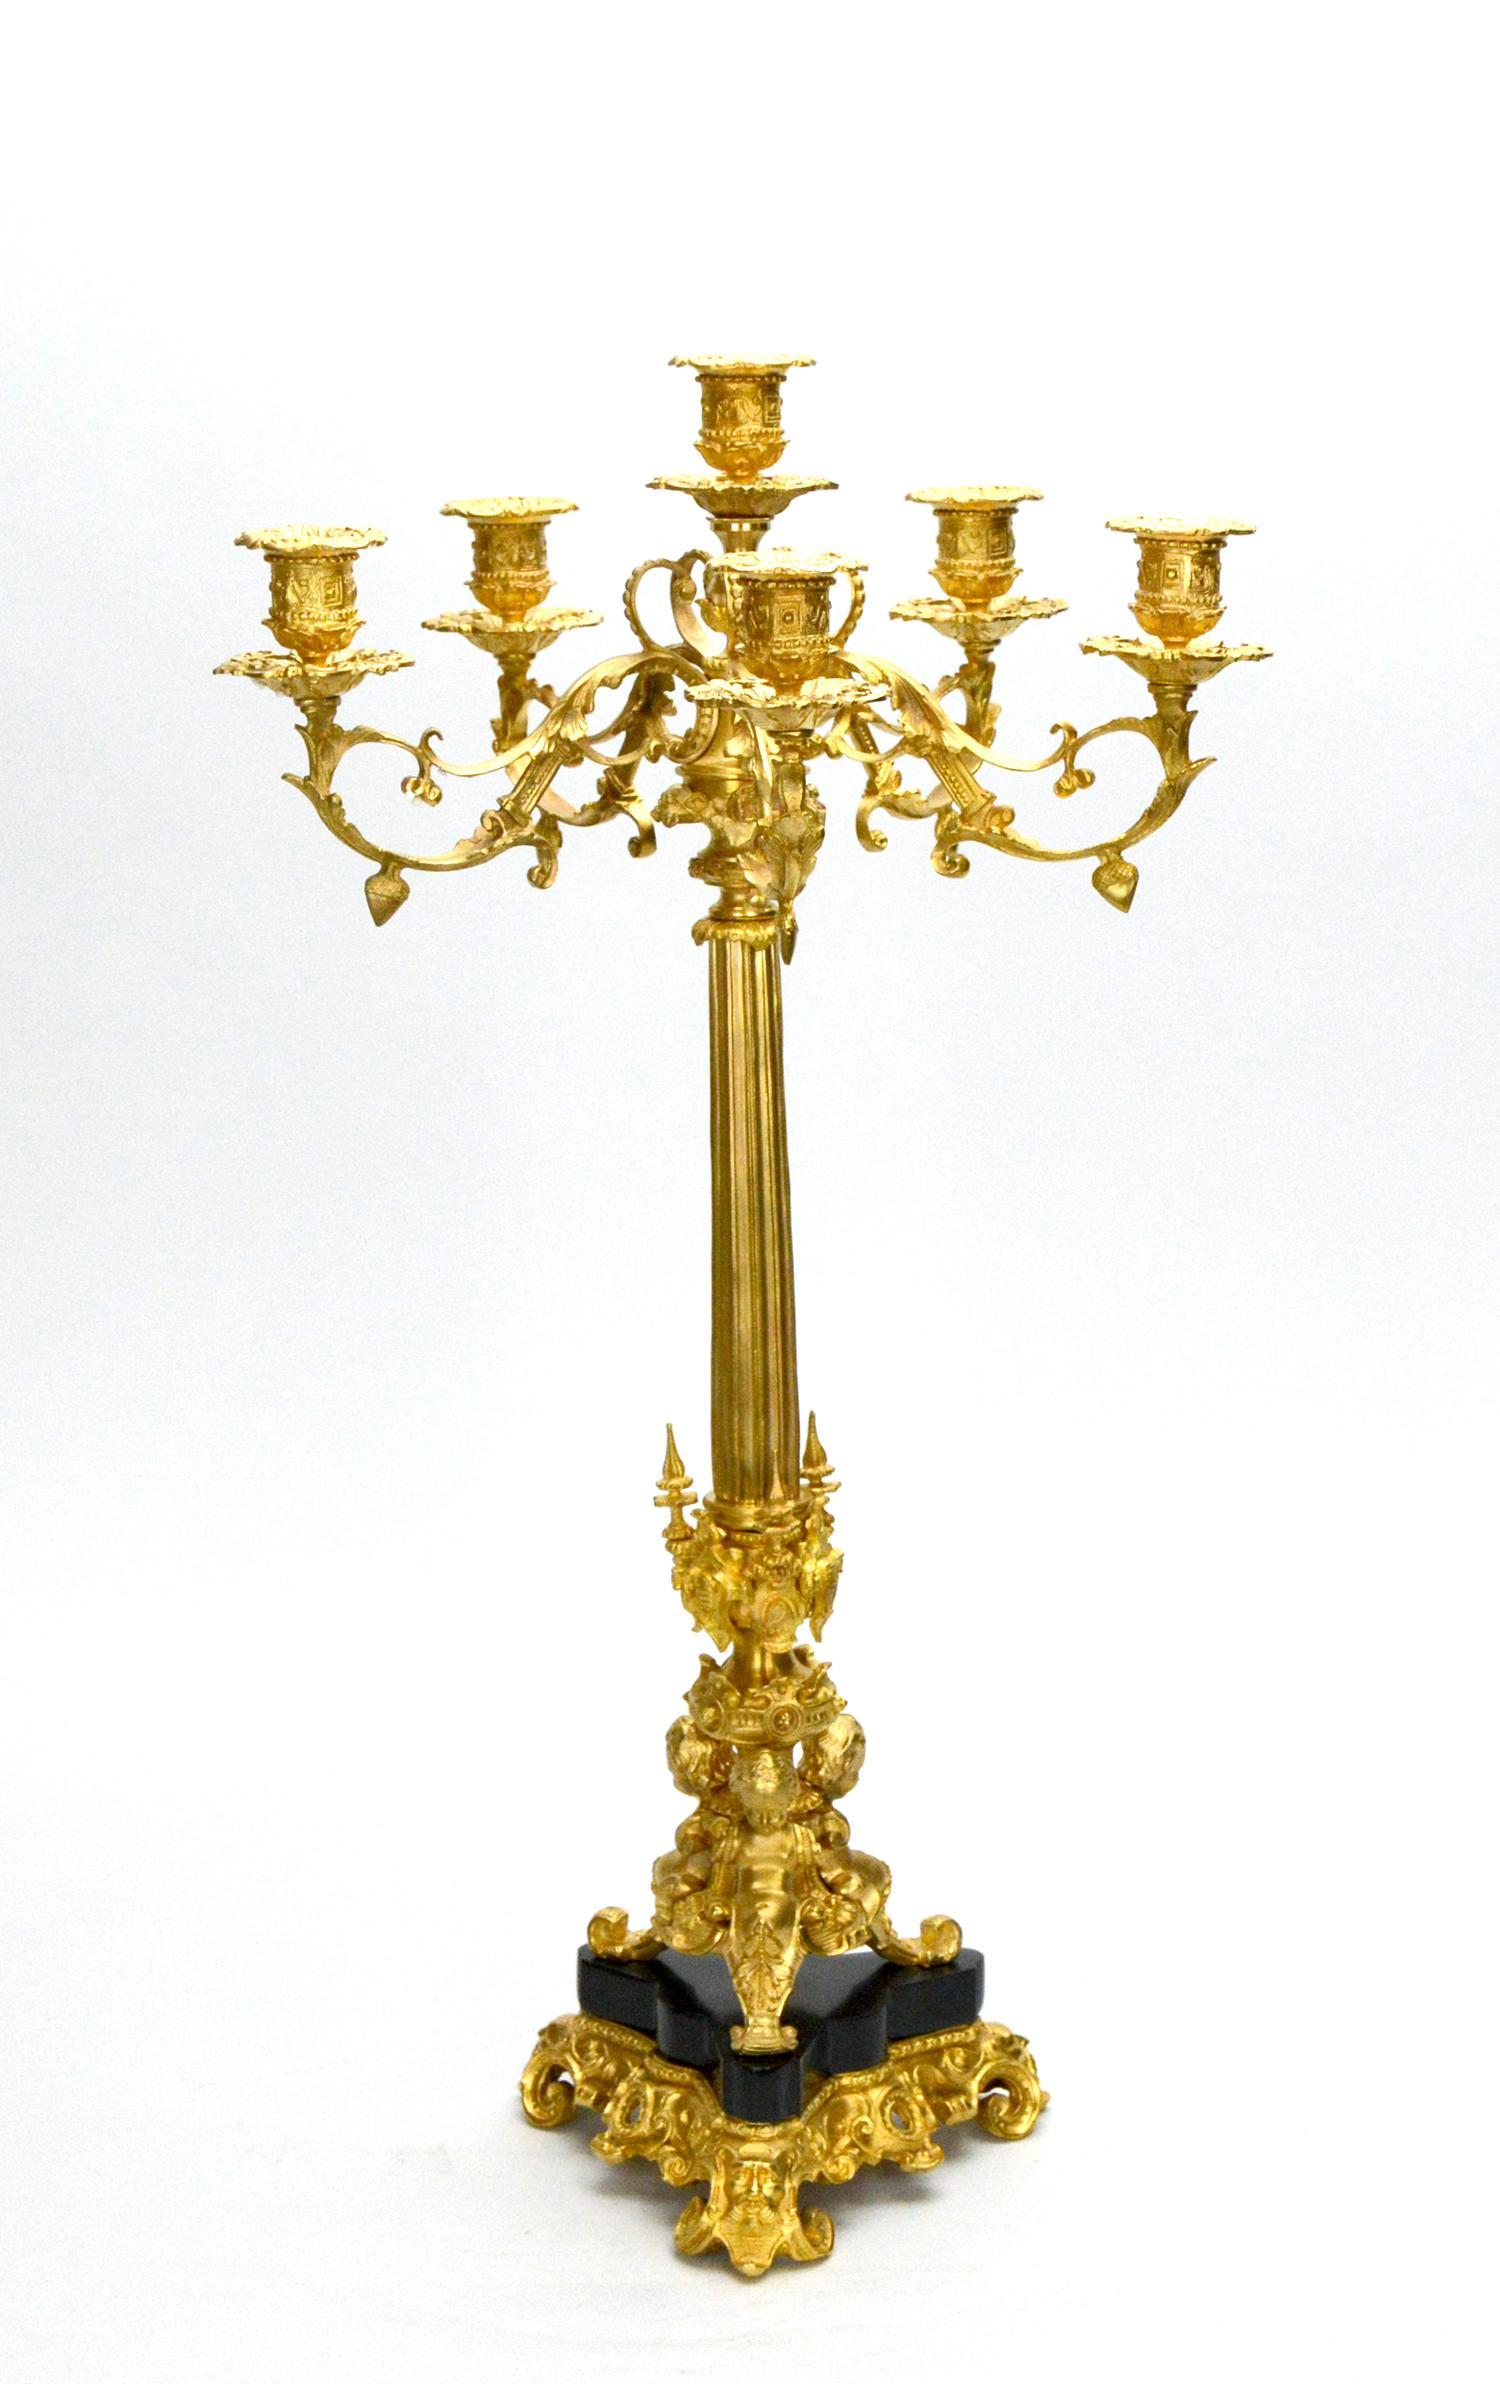 Pair of 6 light gold plated cherub marble Empire bronze candelabra

Here we are offering a pair of beautiful gold plated beautiful 6 light cherub marble Stand Empire bronze candelabra. It's made of solid bronze with black marble base. It holds up